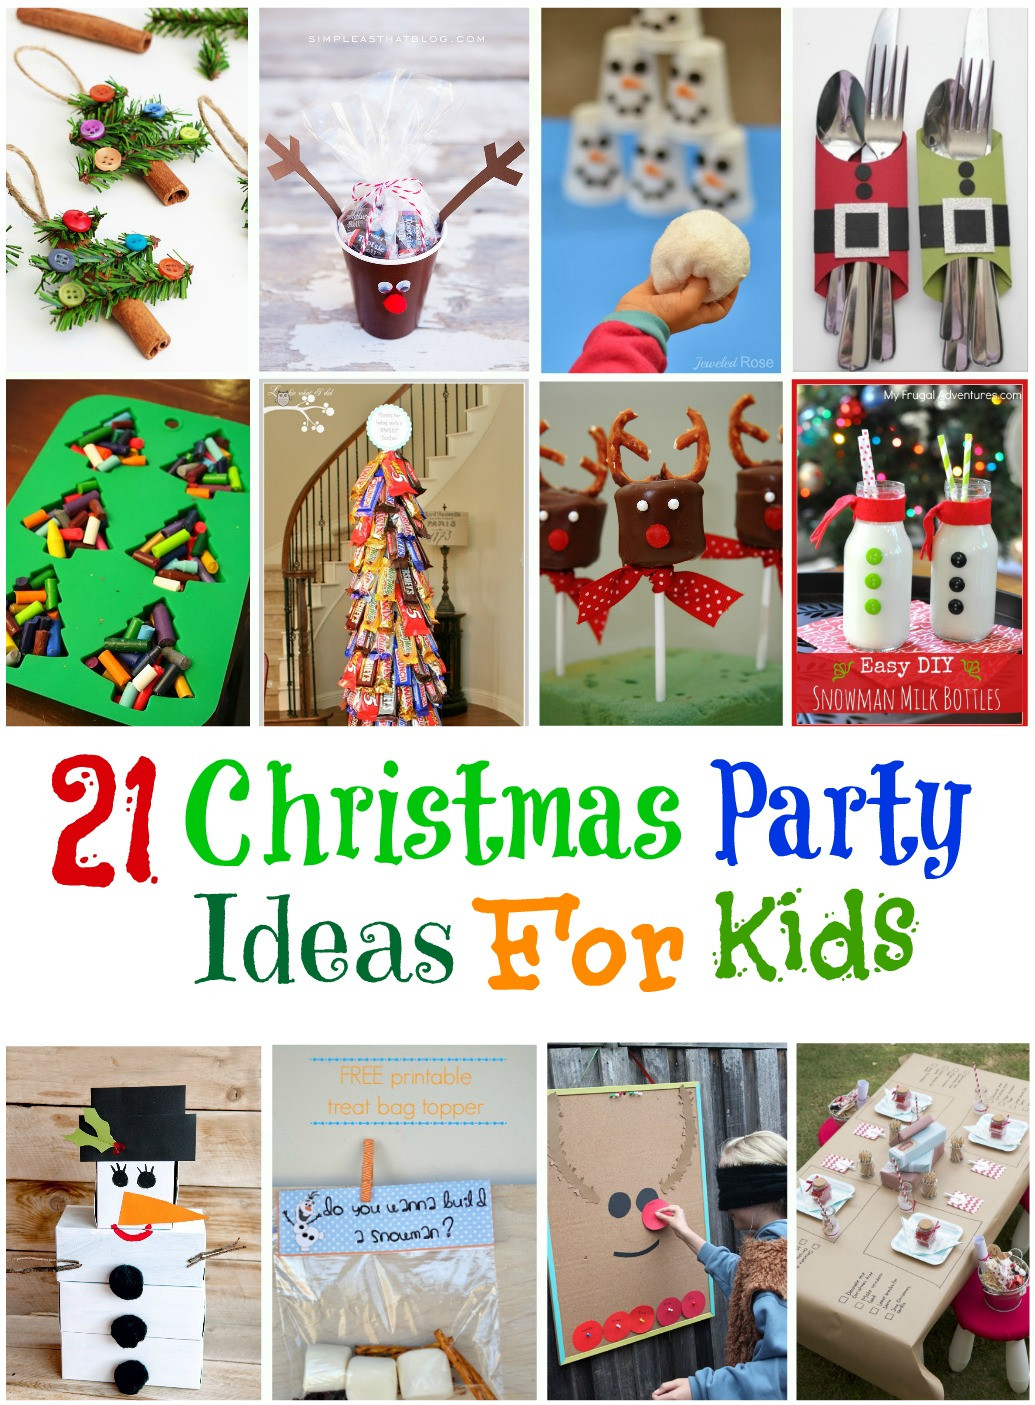 Kindergarten Holiday Party Ideas
 21 Amazing Christmas Party Ideas for Kids